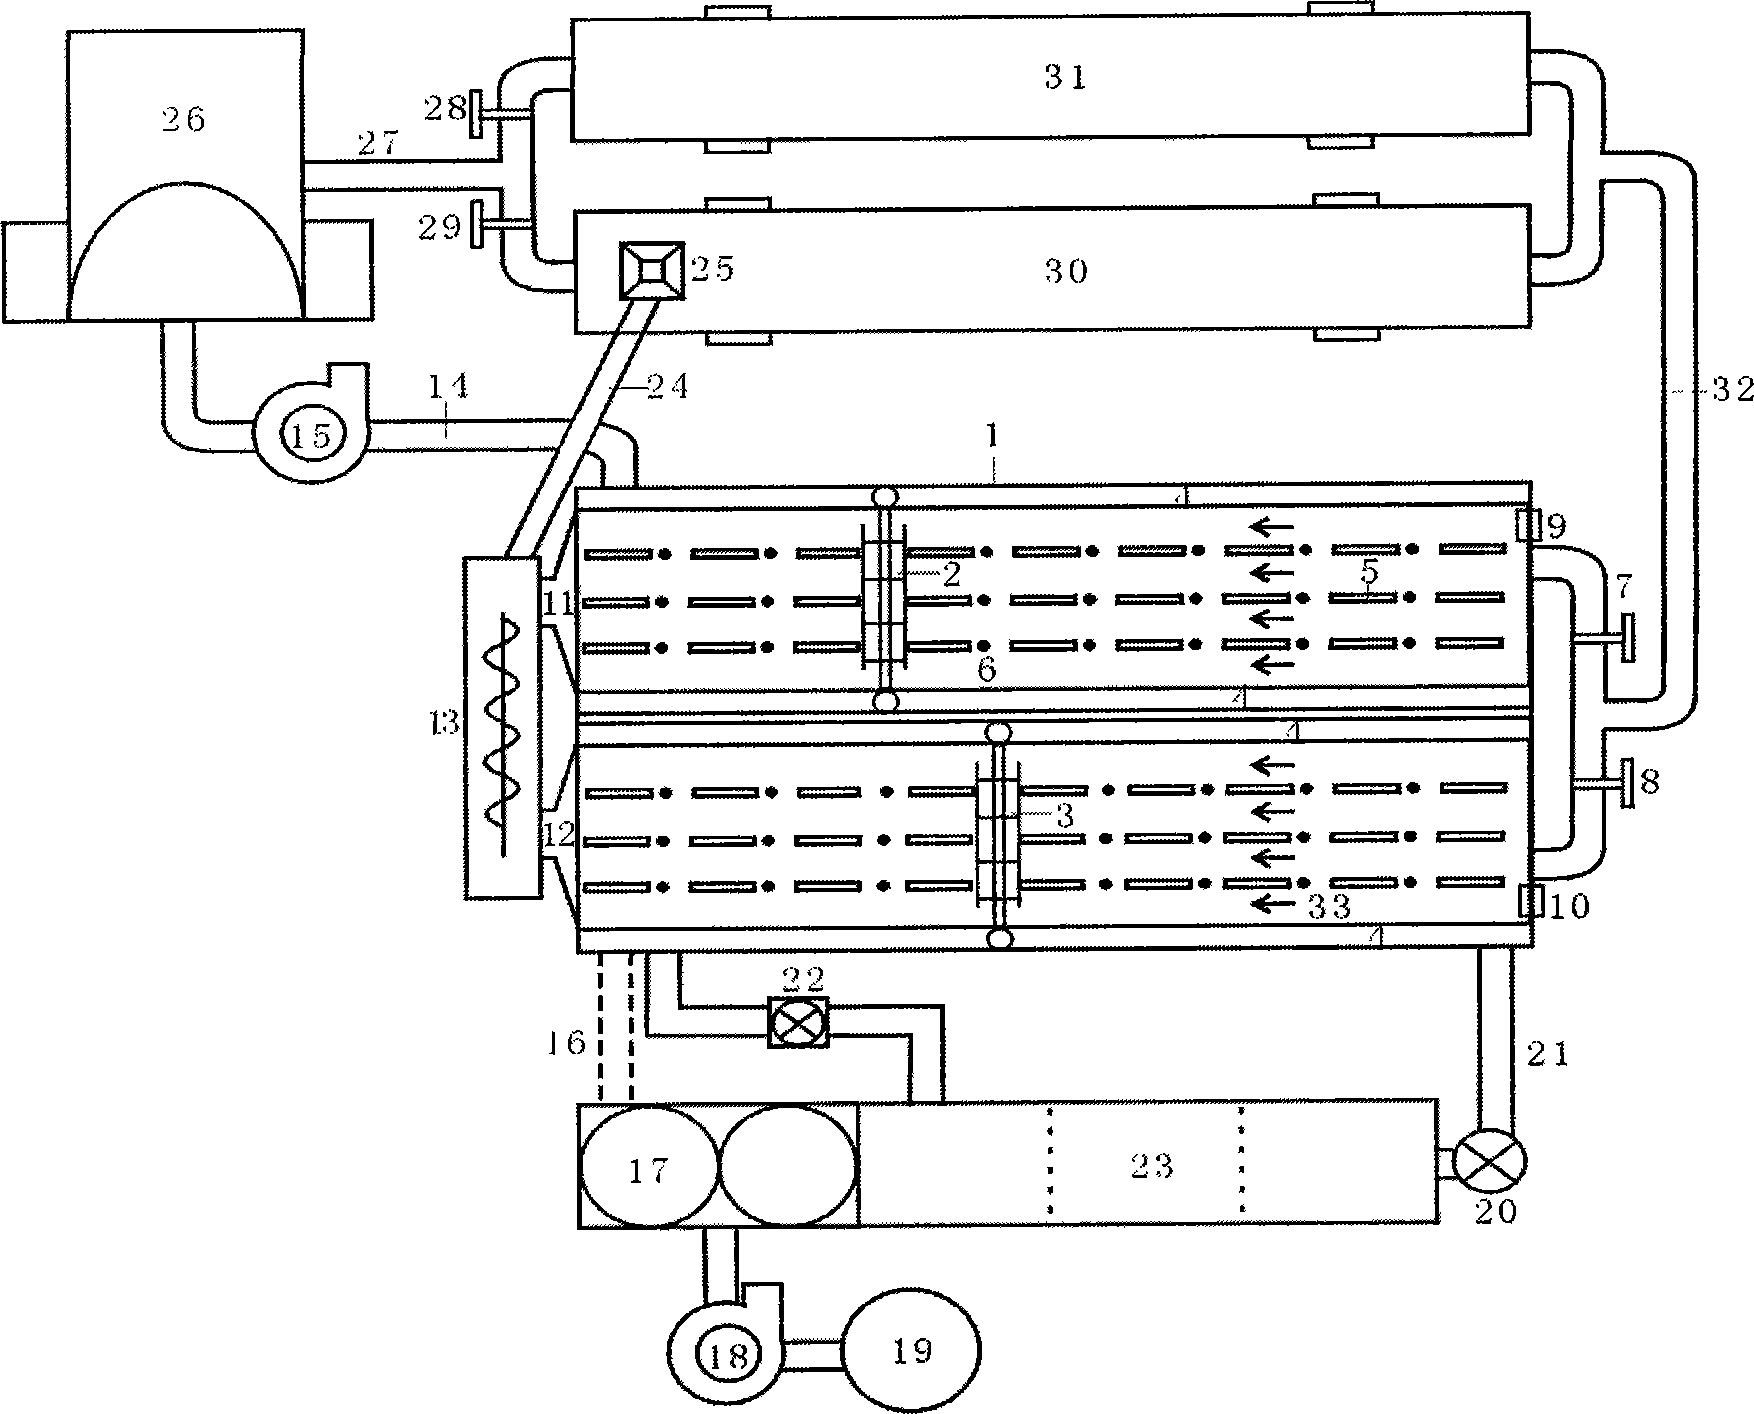 Sludge storing and preheating system utilizing sludge drying tail gas afterheat